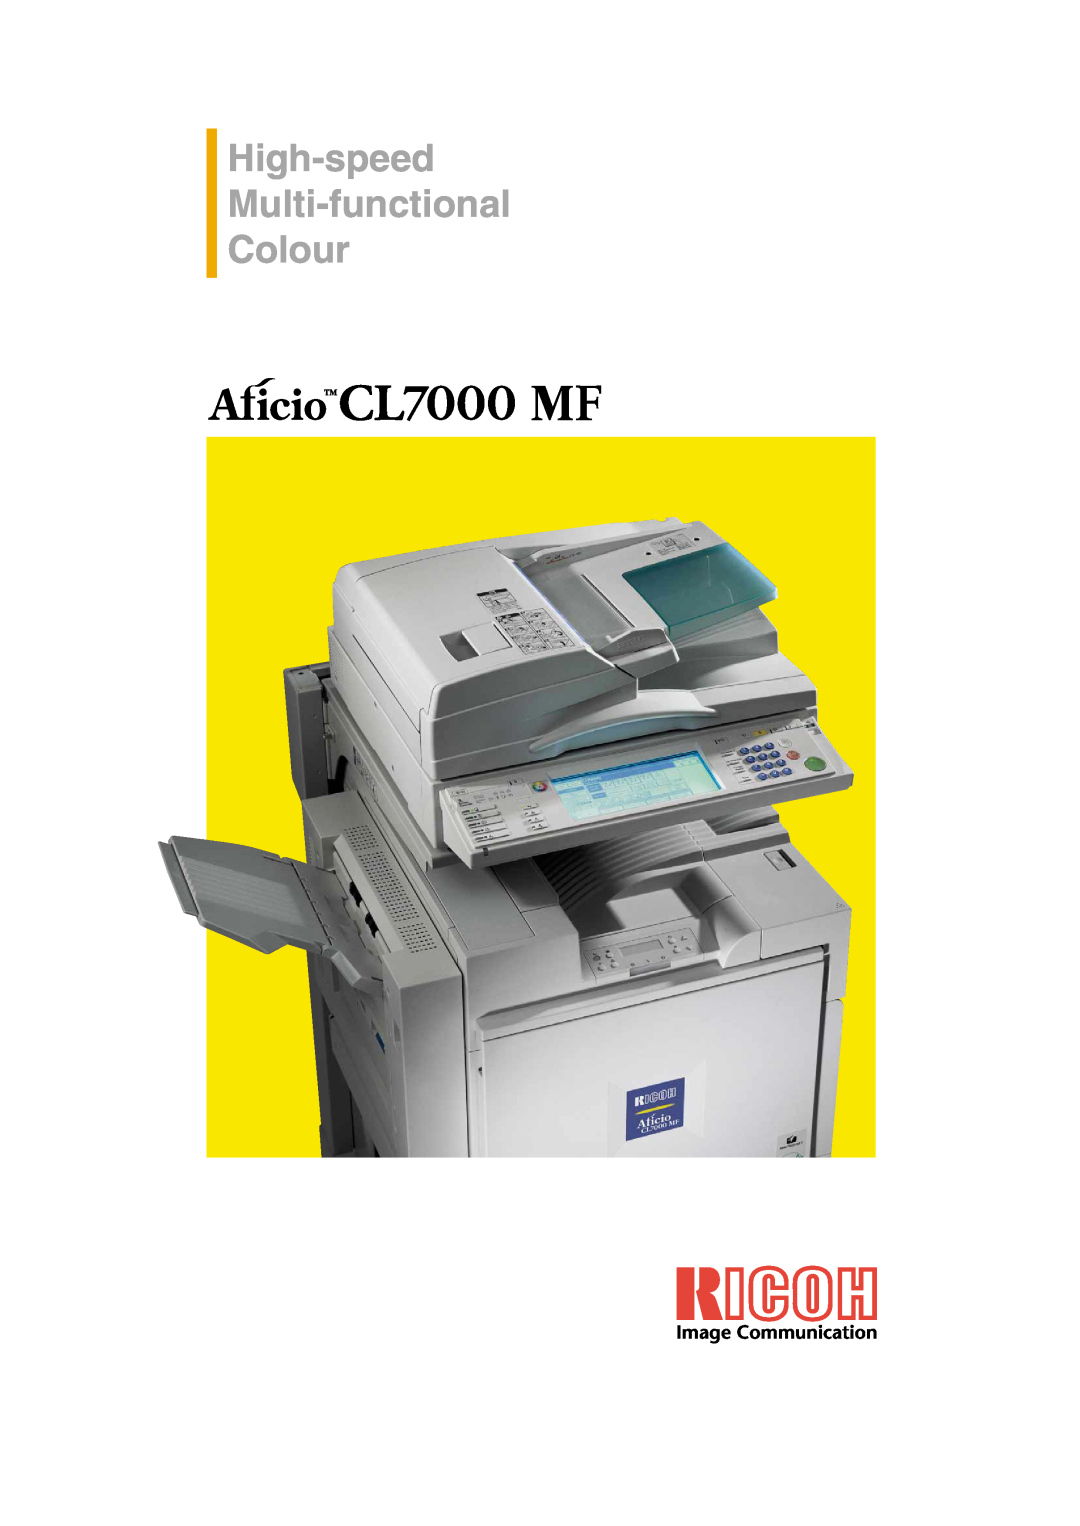 Ricoh CL7000 MF manual High-speed Multi-functional Colour 